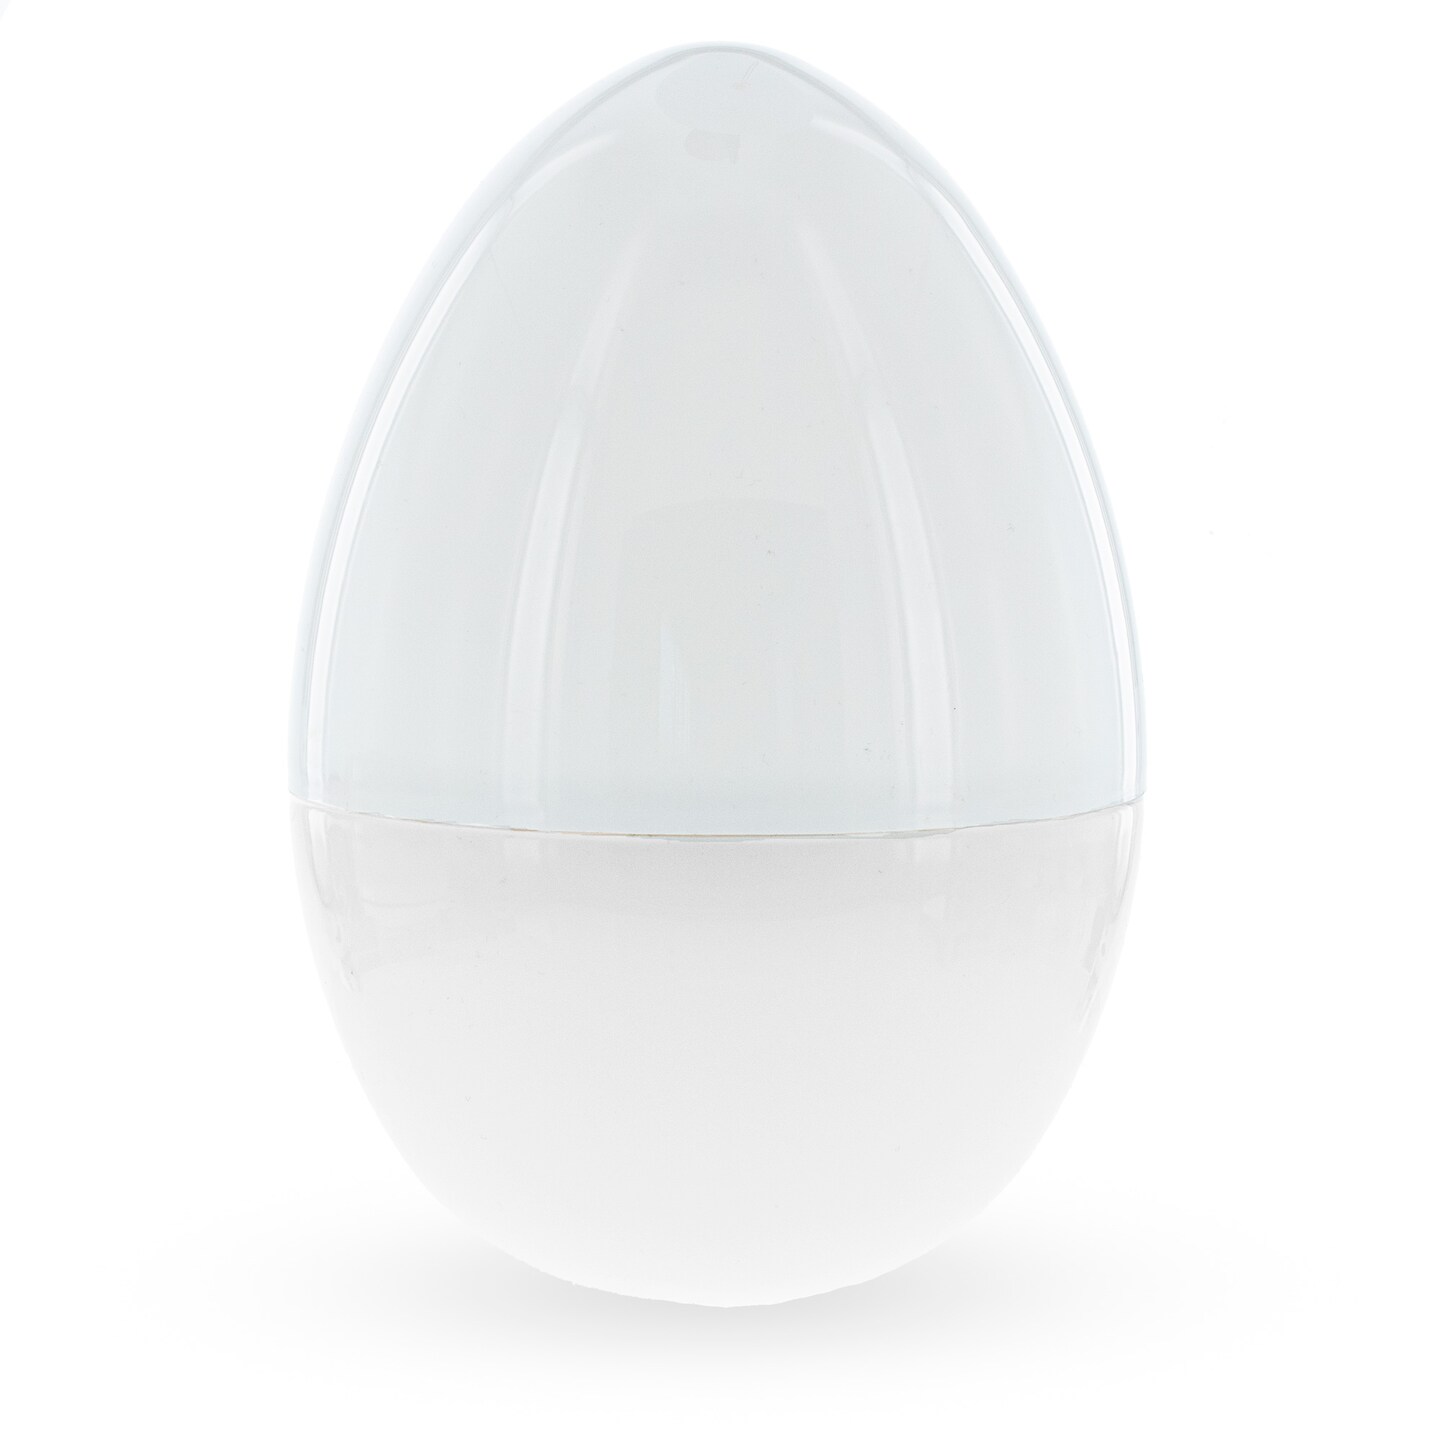 Giant Size Large Two Shades White Plastic Easter Egg 12 Inches